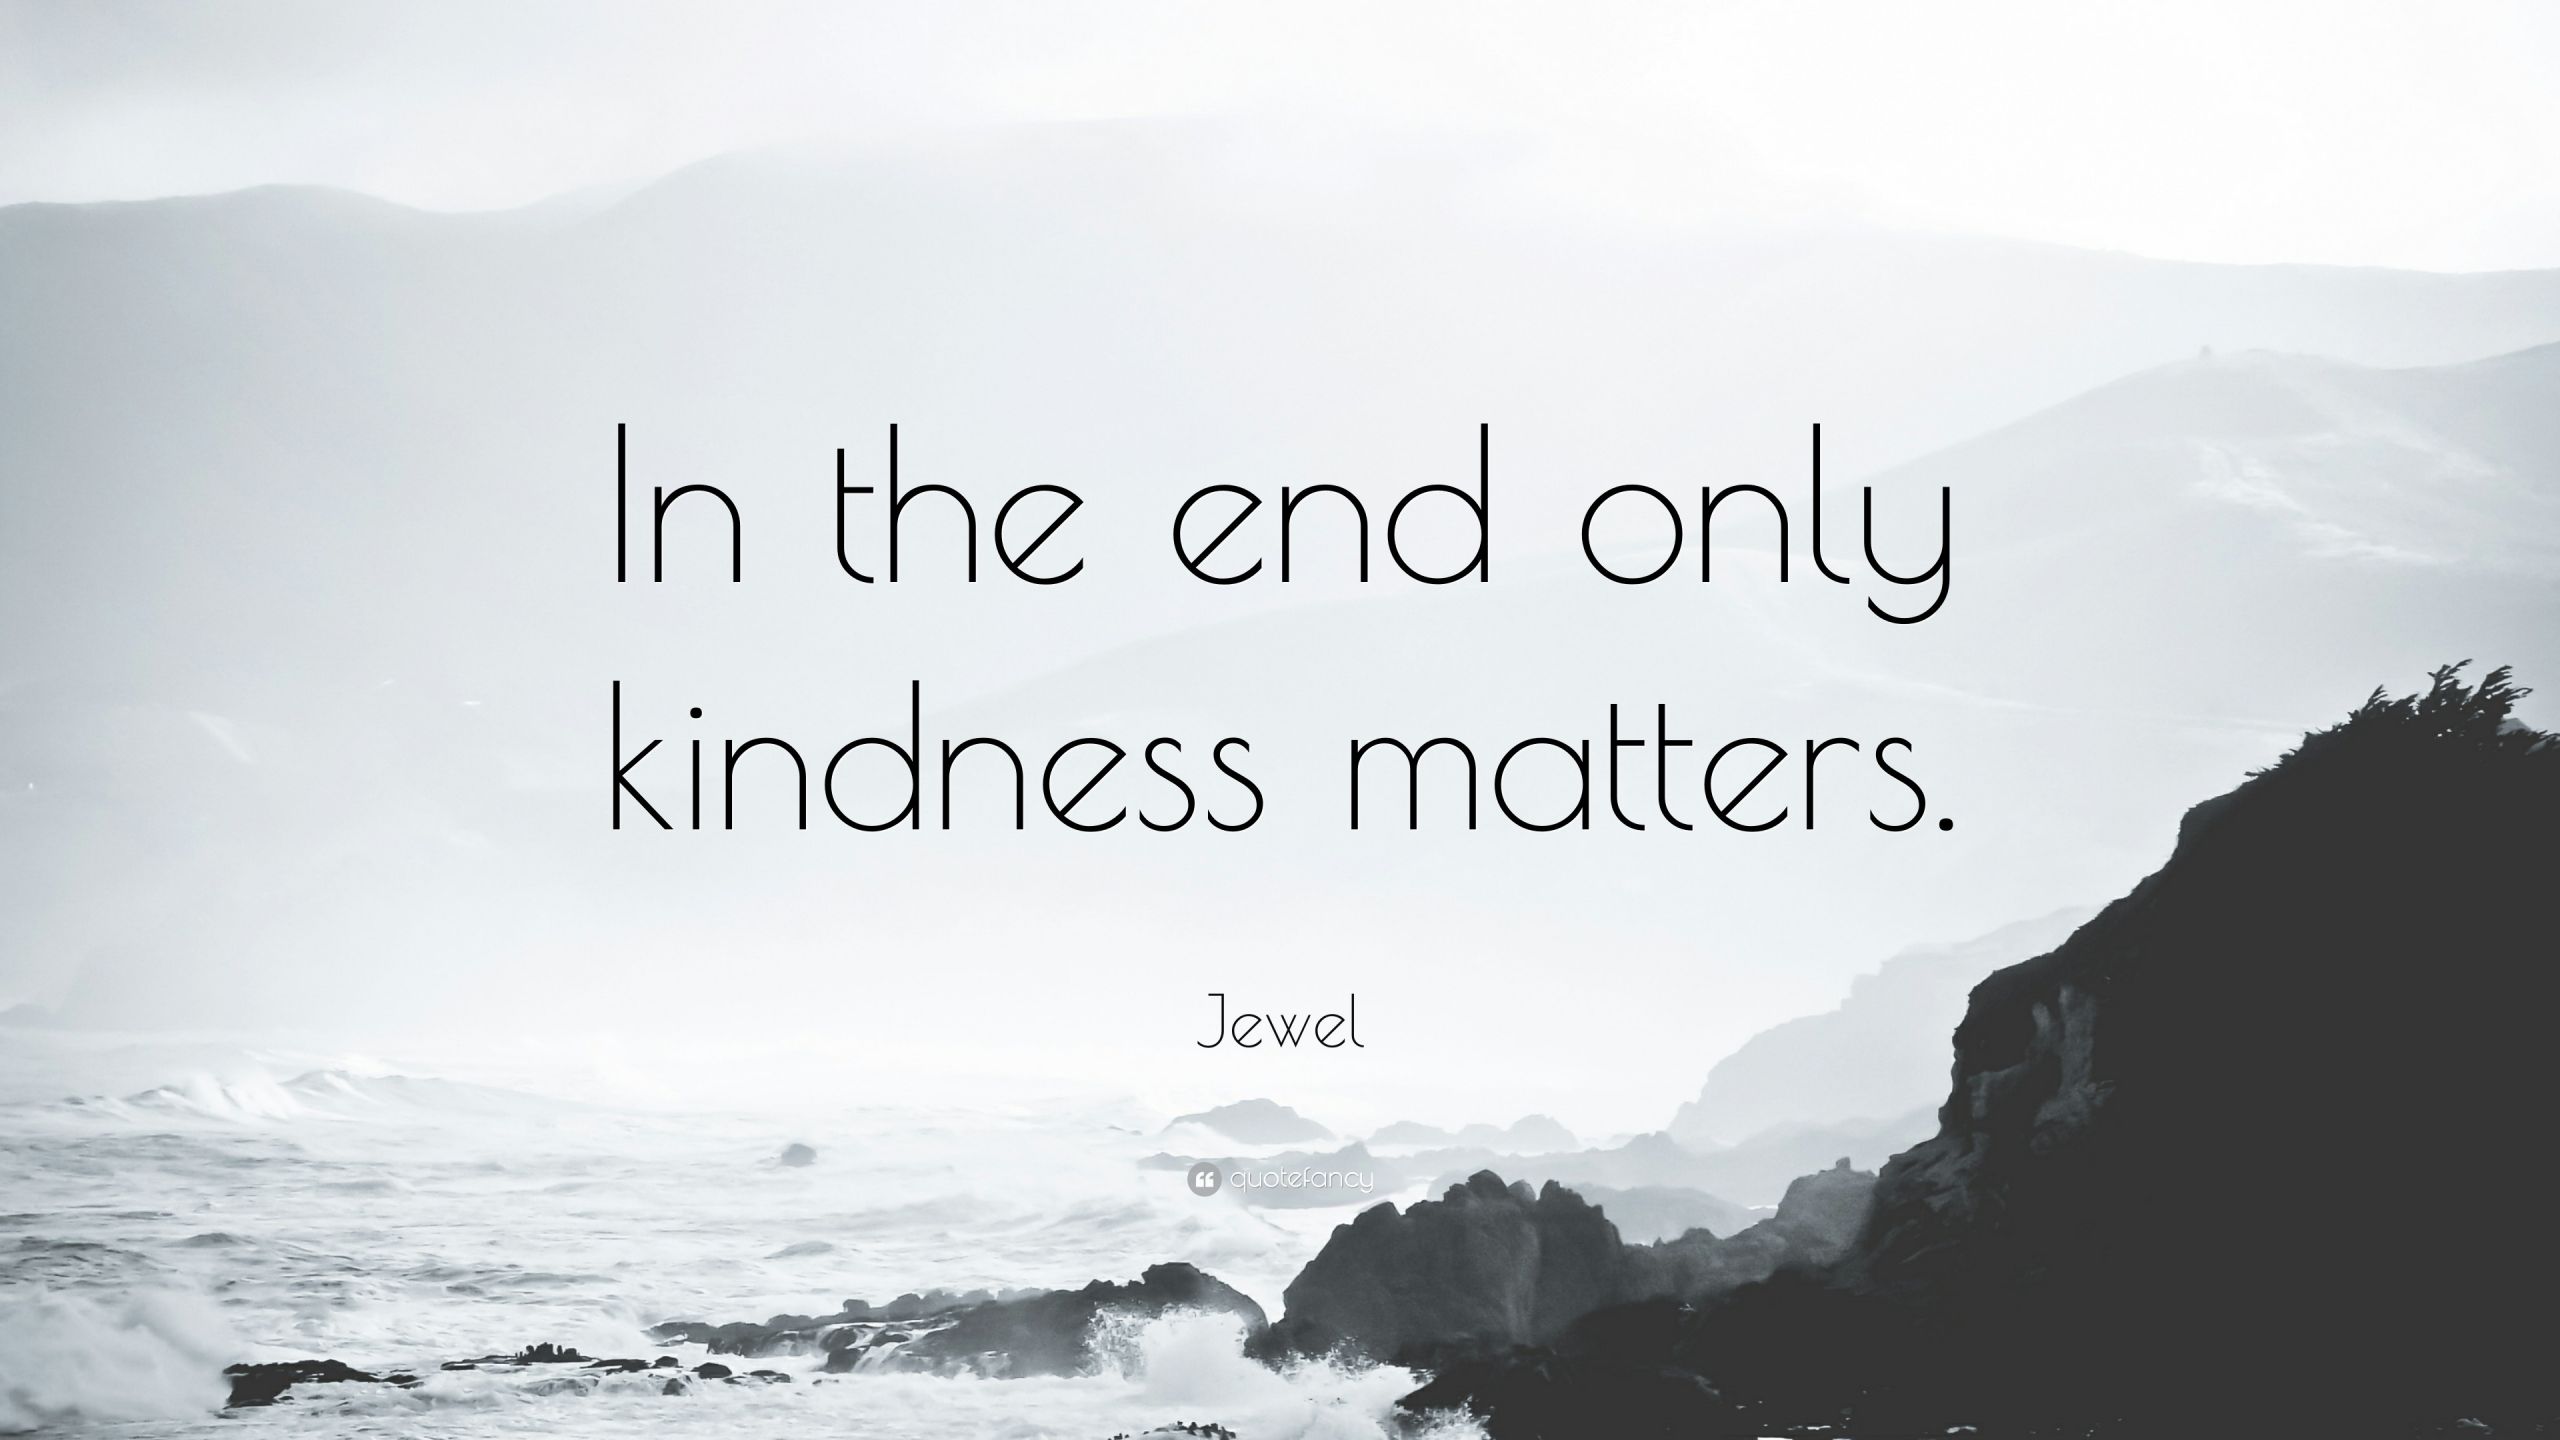 Kindness Matters Quotes
 Jewel Quote “In the end only kindness matters ” 12